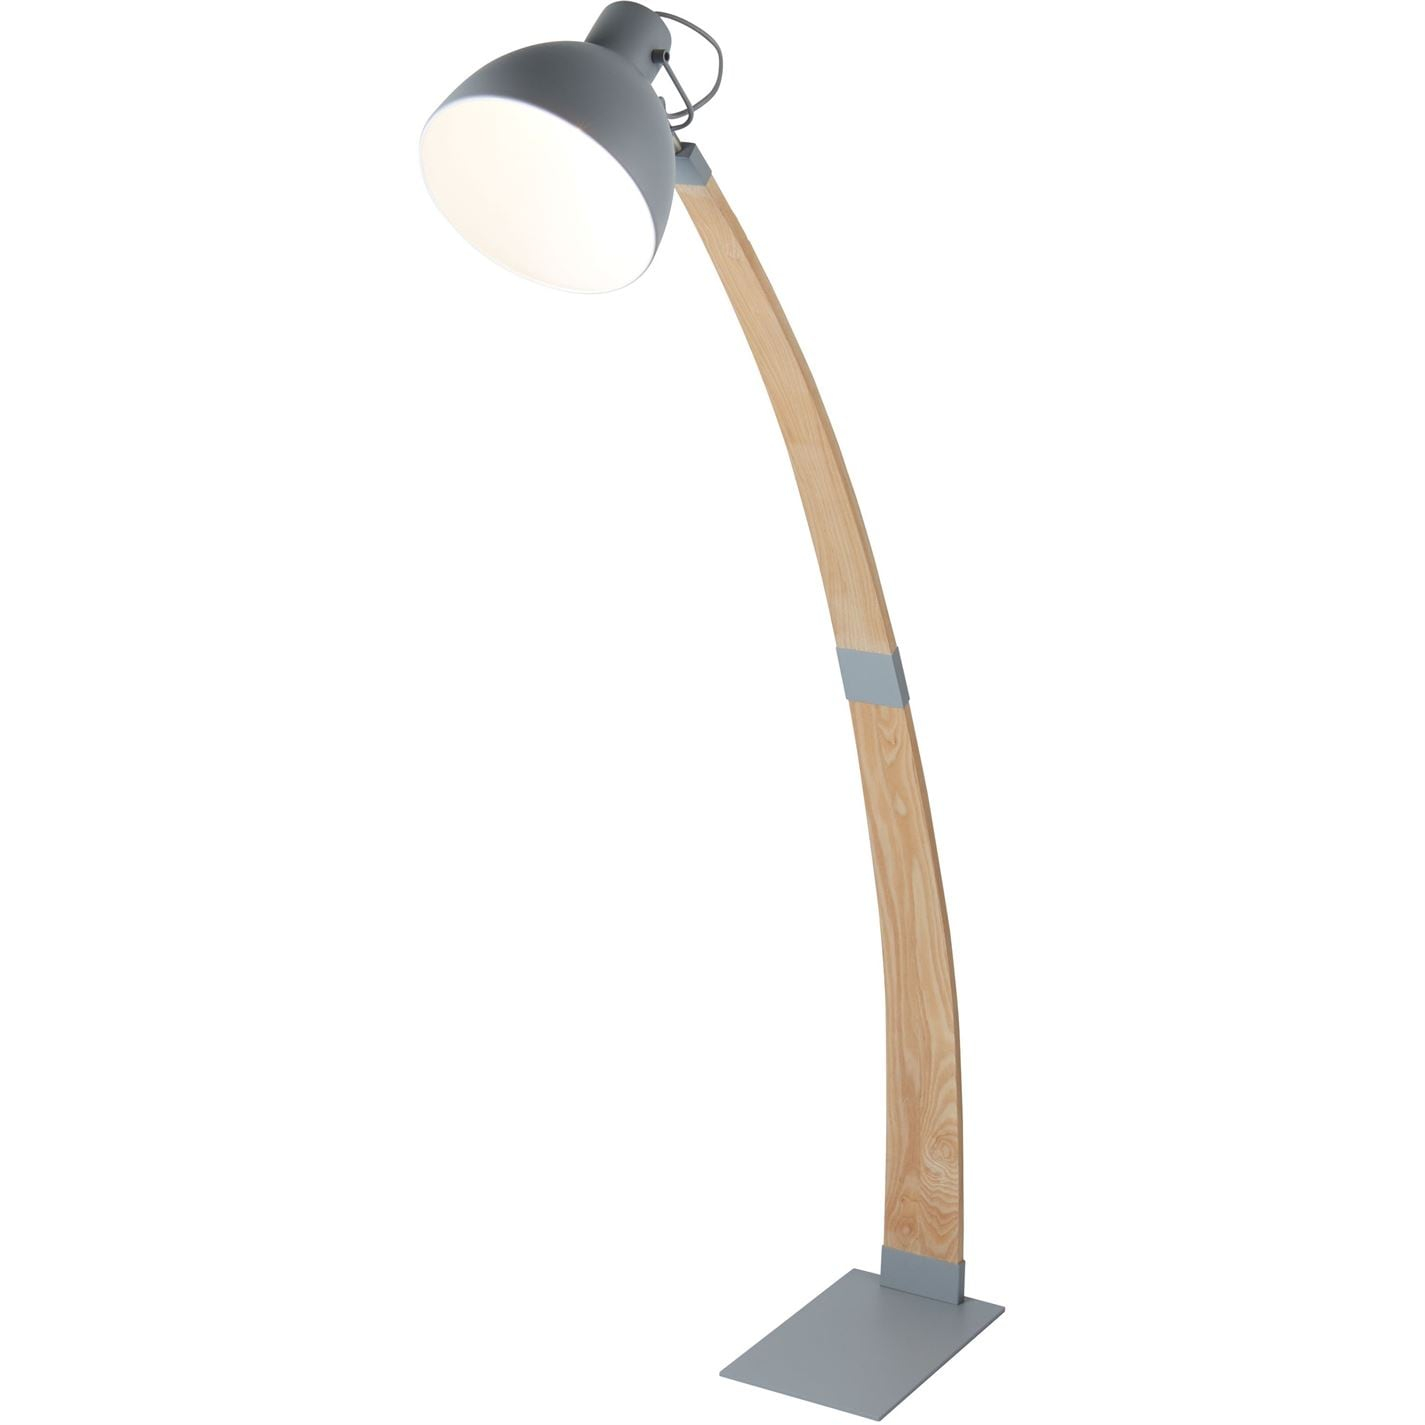 Janna Floor Lamp House Of Fraser throughout sizing 1425 X 1425